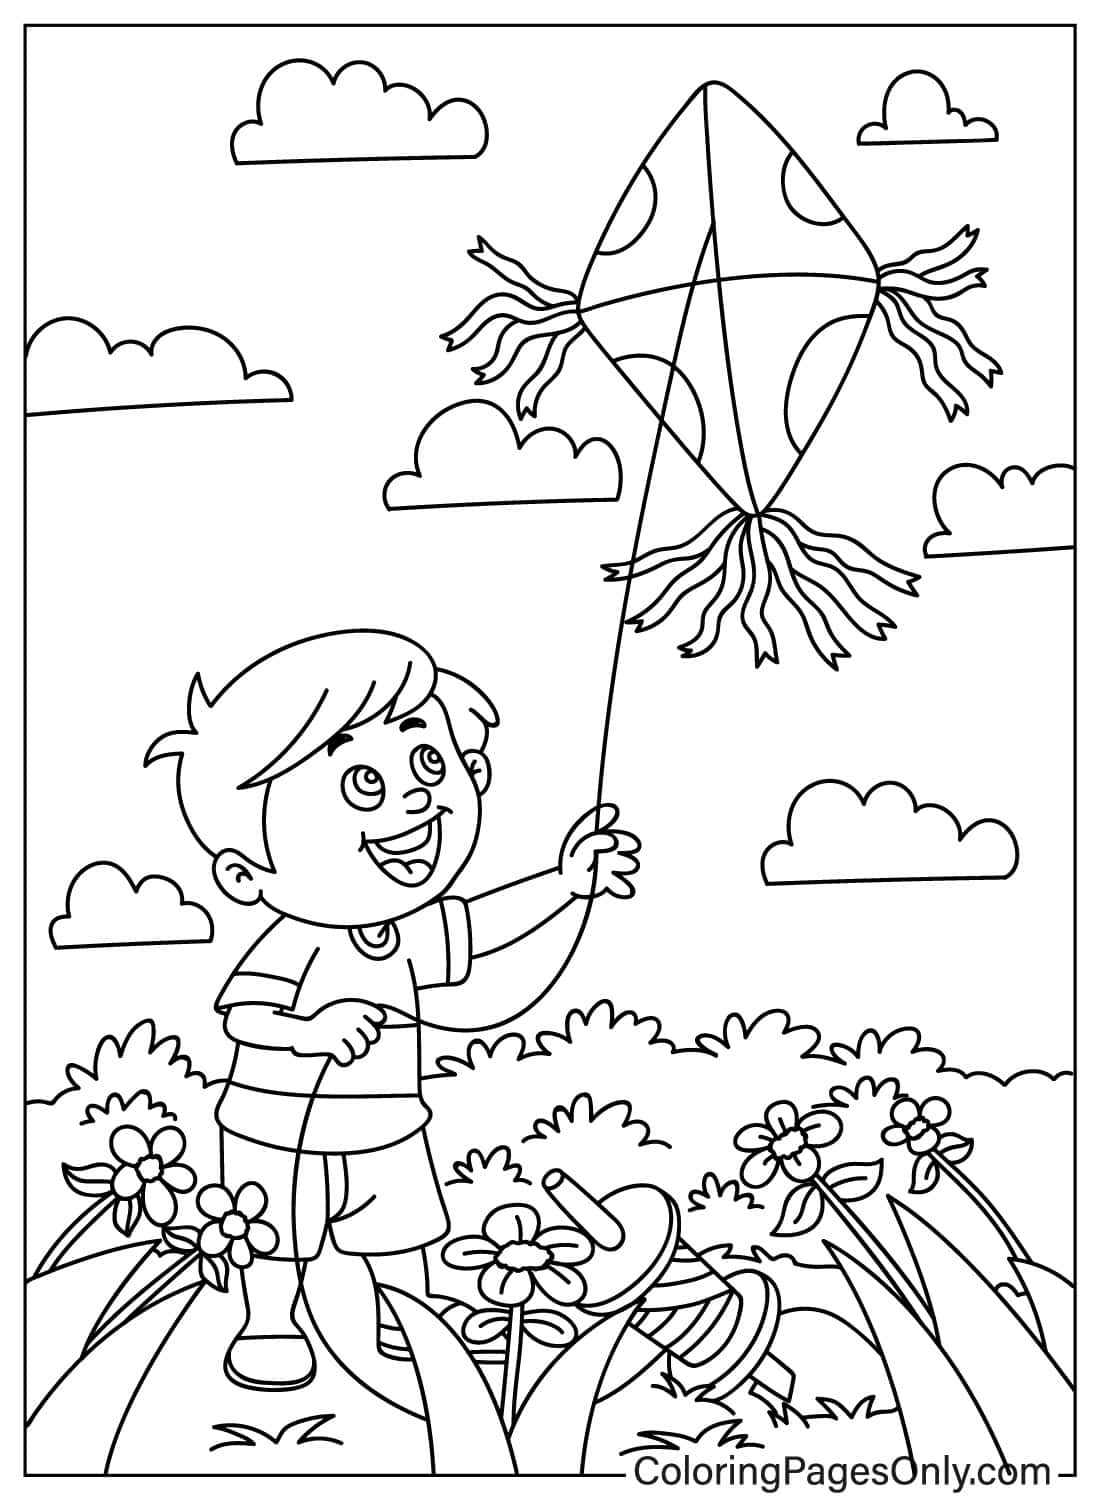 Happy Boy Flying a Kite with Flowers from Kite